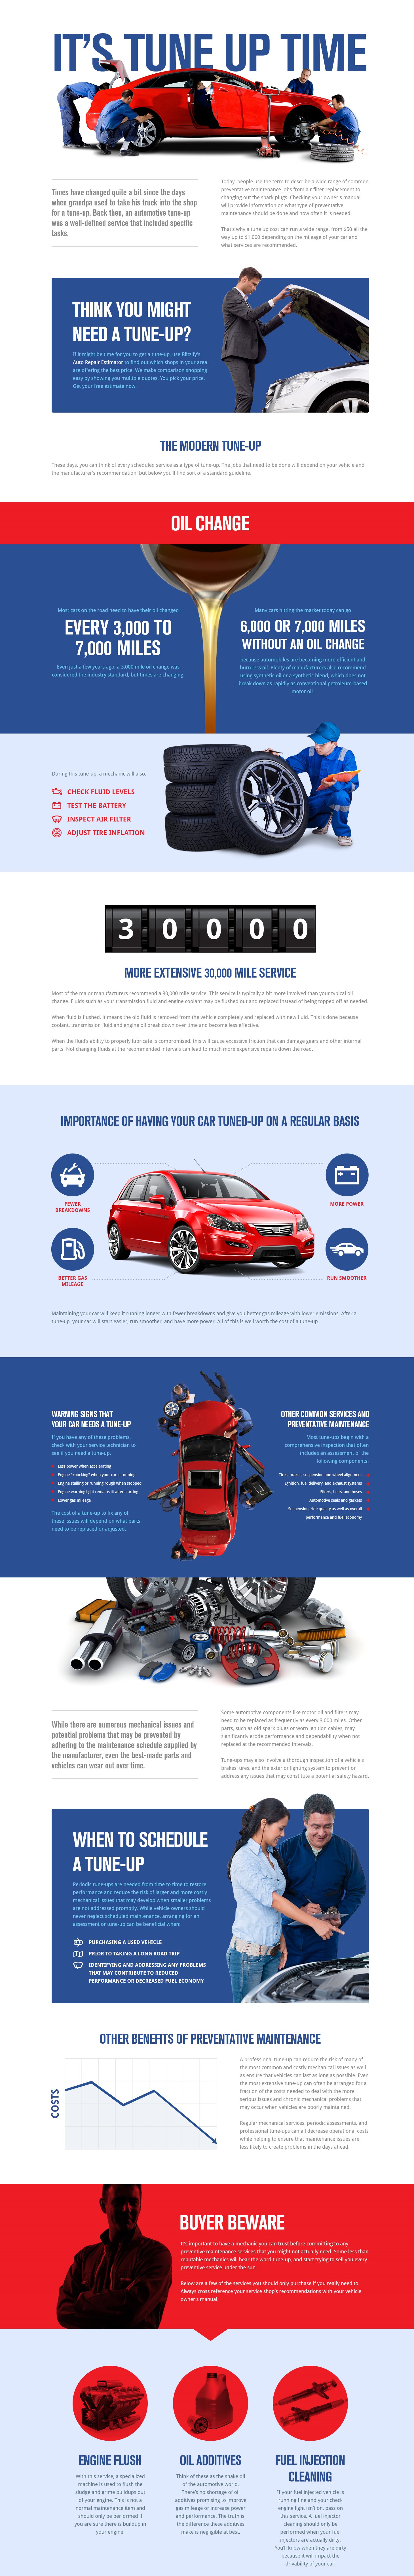 When To Bring Your Car In For A Tune-up - Infographic